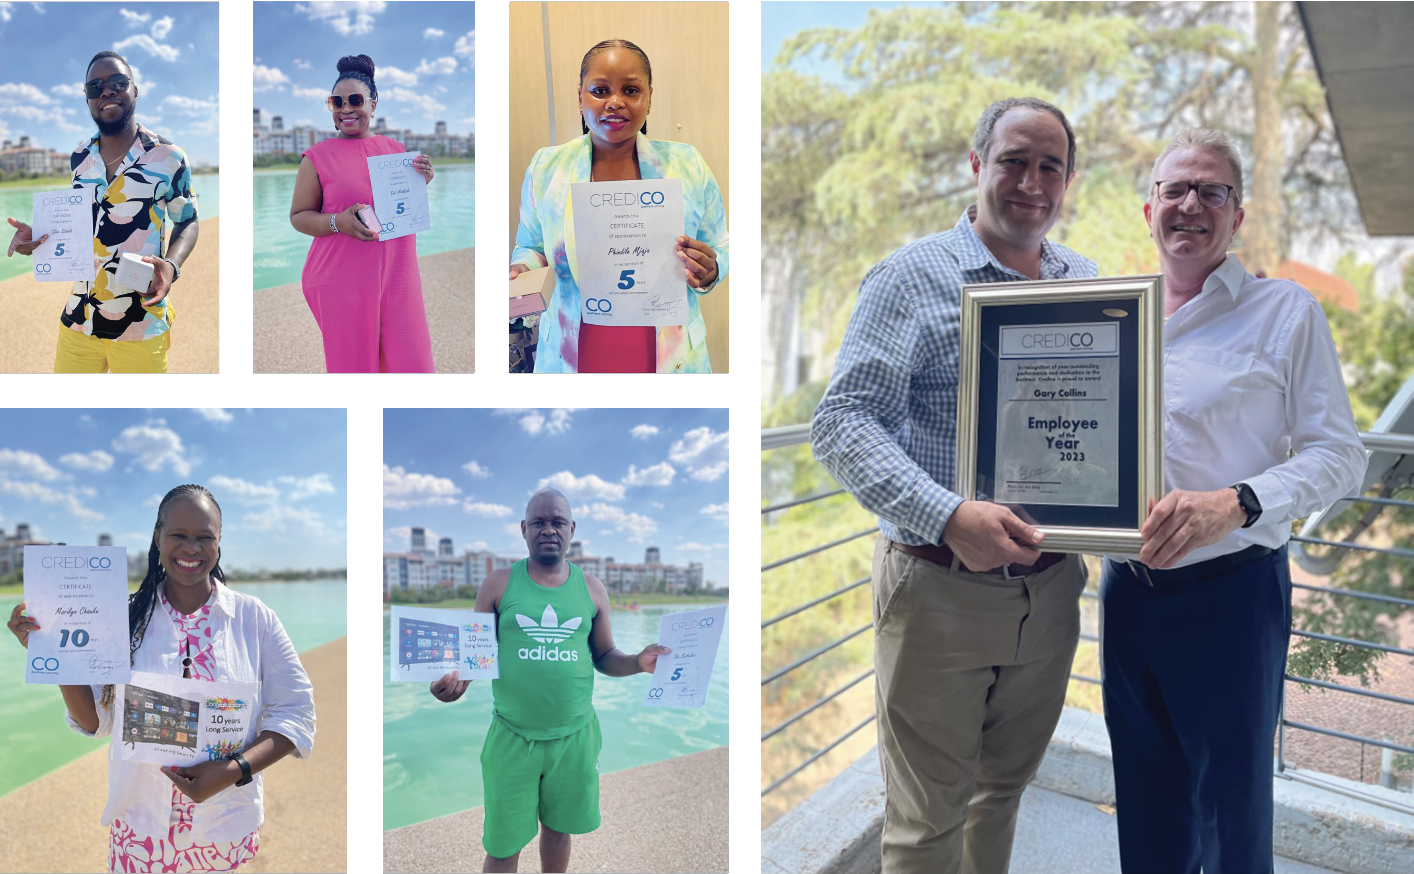 Credico South Africa recognizes Gary Collins as 2023 Employee of the Year, Marilyn Chauke and Sibusiso Buthelezi for ten years of service, and Clive Sithole, Didi Mothale, and Phindile Mjaja for five years of service. Thank you for all your hard work!